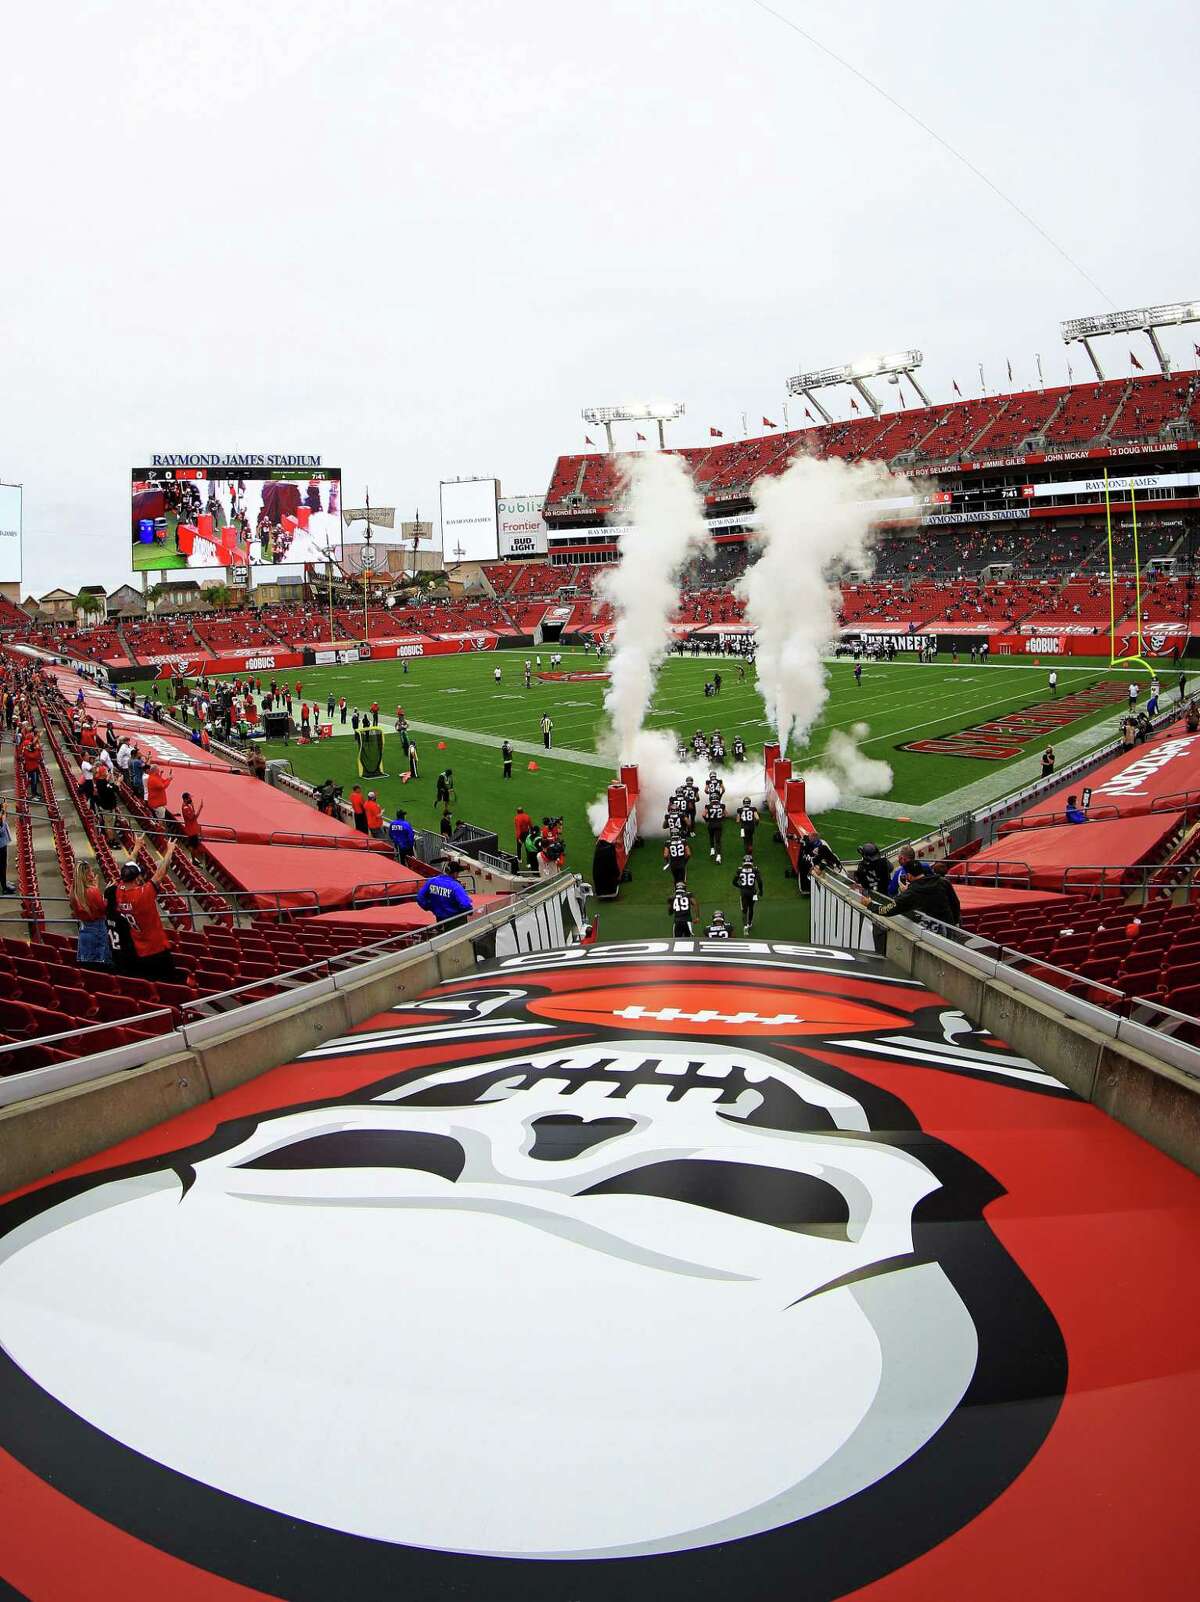 Raymond James Stadium in Tampa, Fla., will host WWE’s WrestleMania 37 on April 10 and April, 11, 2021.